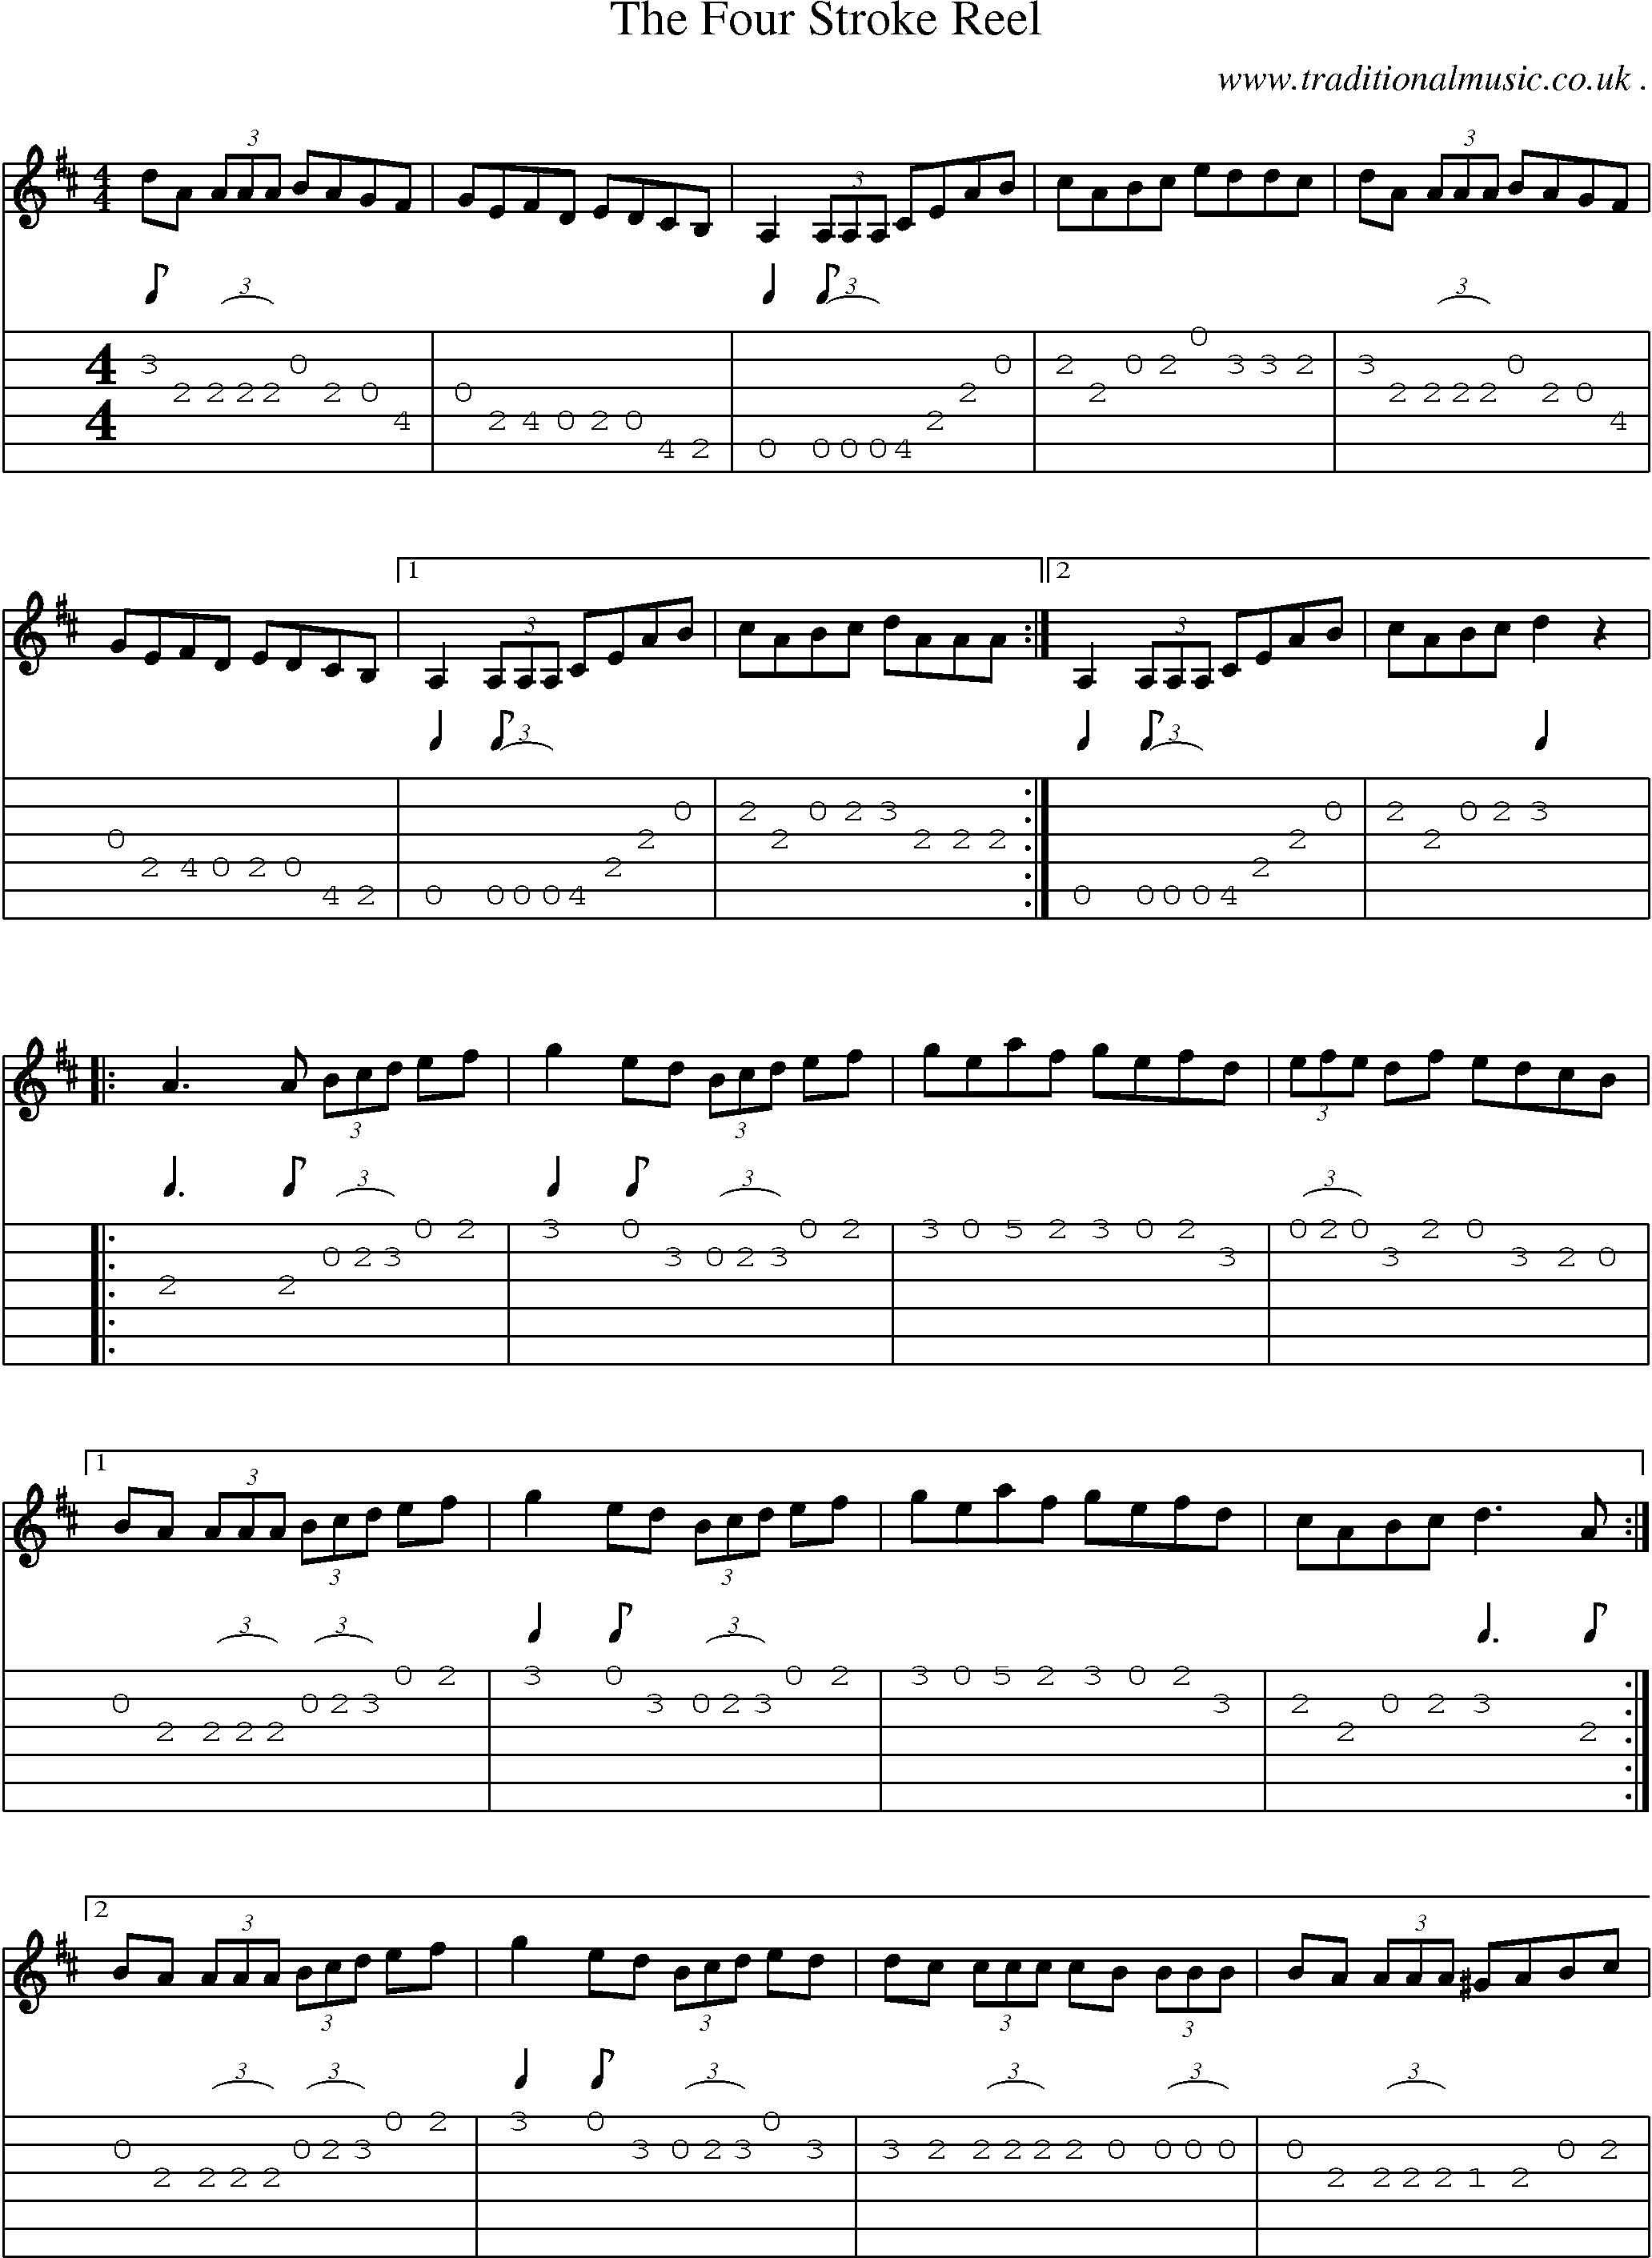 Sheet-Music and Guitar Tabs for The Four Stroke Reel